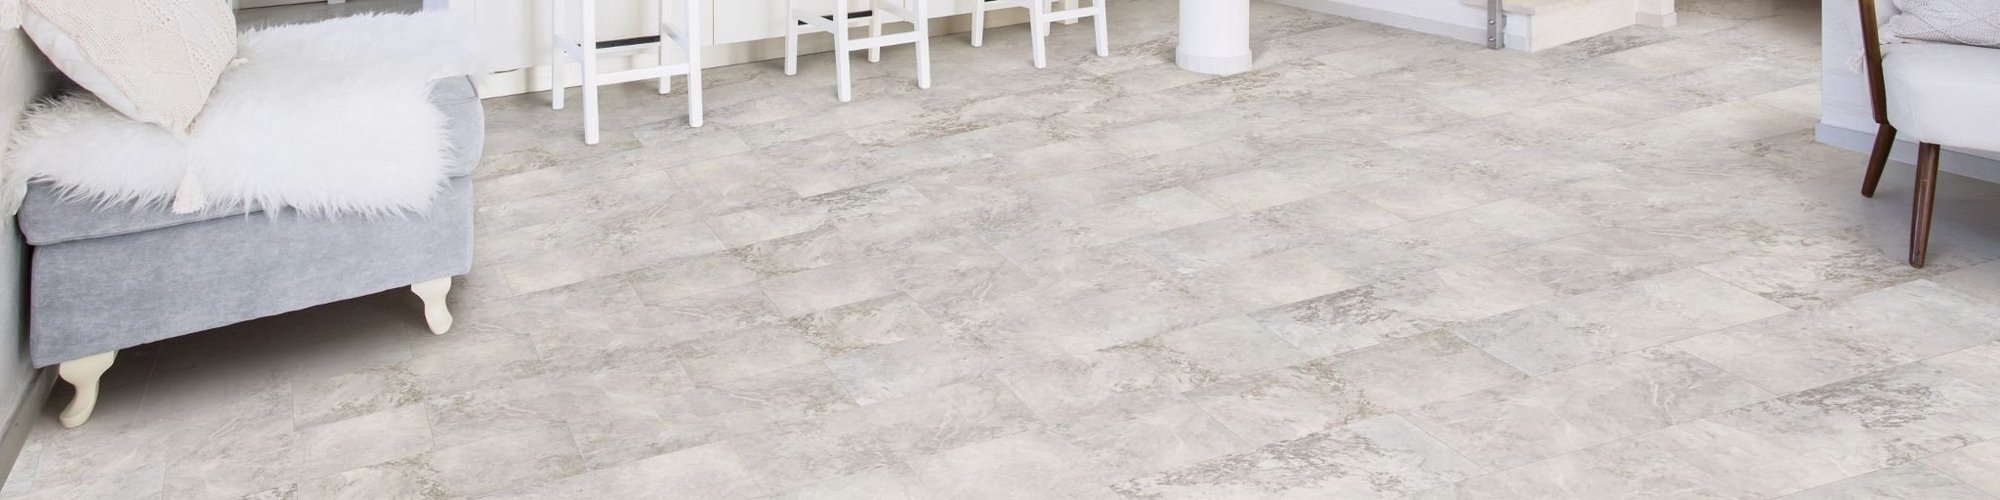 white lvp tile from Green Carpet Co. - The Flooring Connection in San Antonio, TX